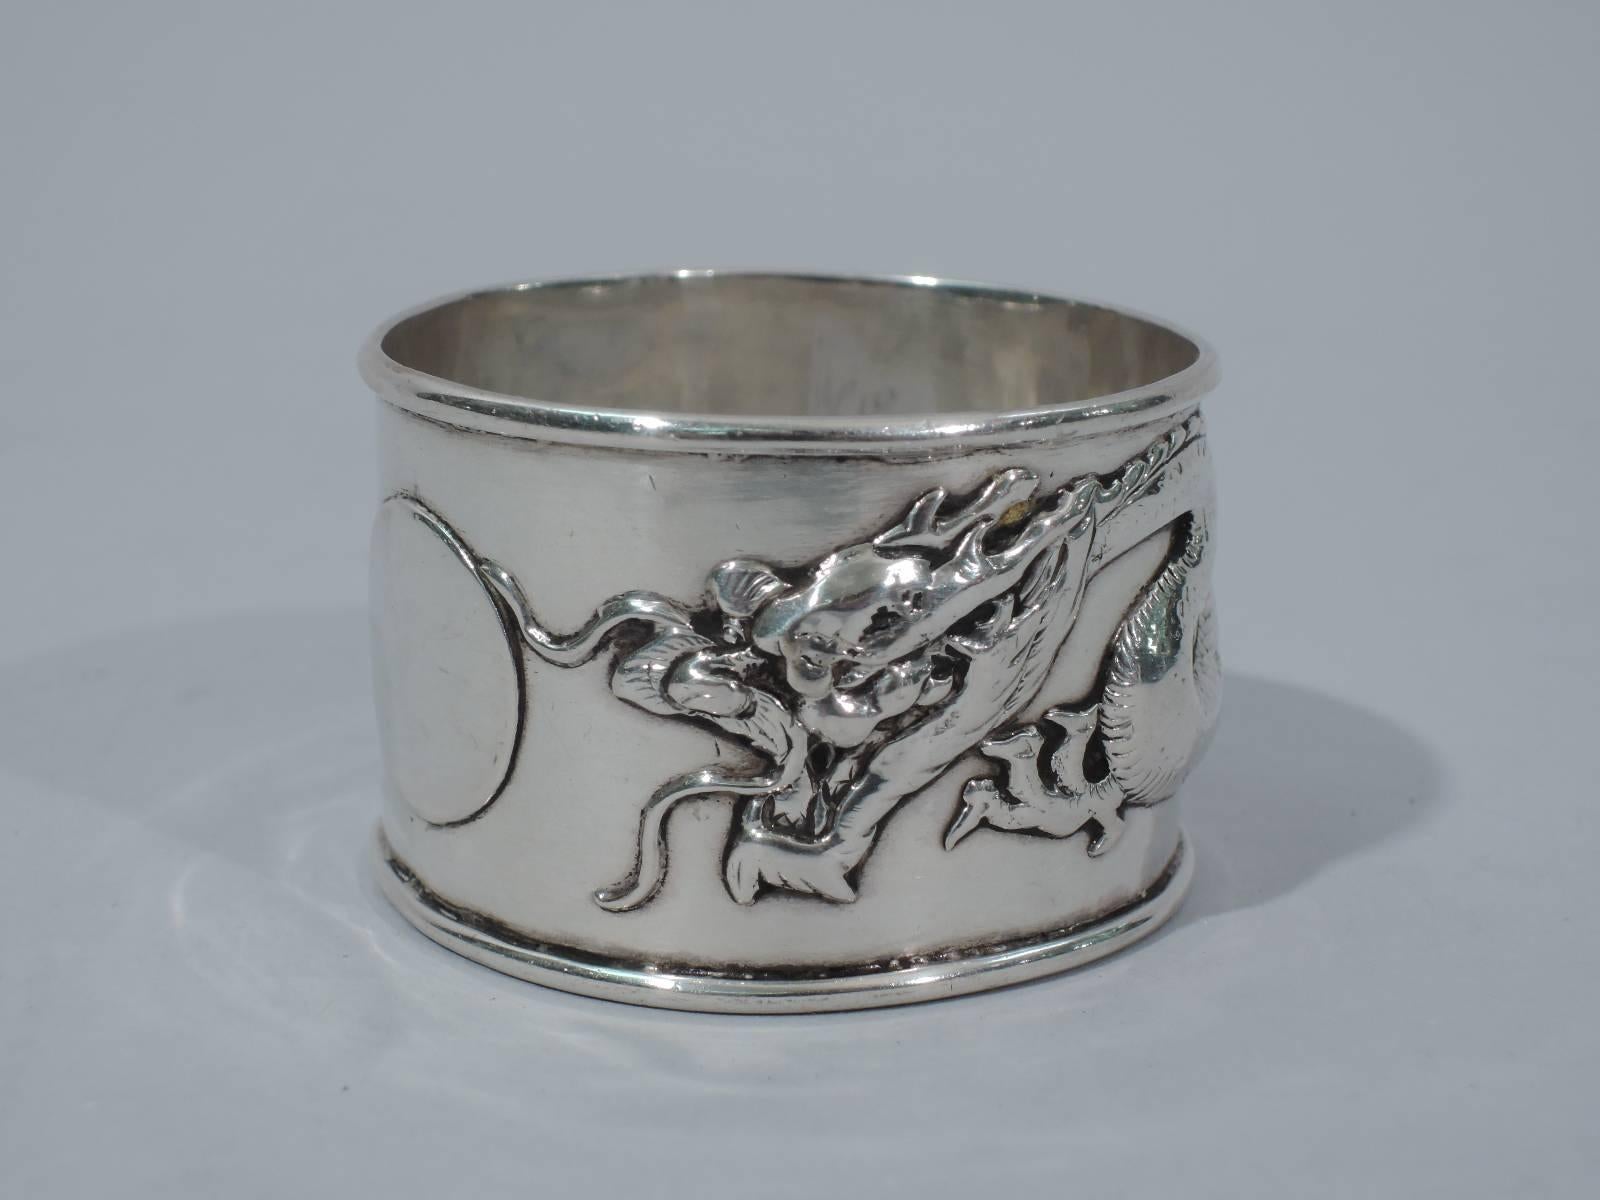 Chinese export silver napkin ring with applied wraparound dragon and circular plate (vacant). Hallmarked with Chinese characters and initials ‘WA’ for unknown maker active at the turn of the century. Condition: Very good with some wear and